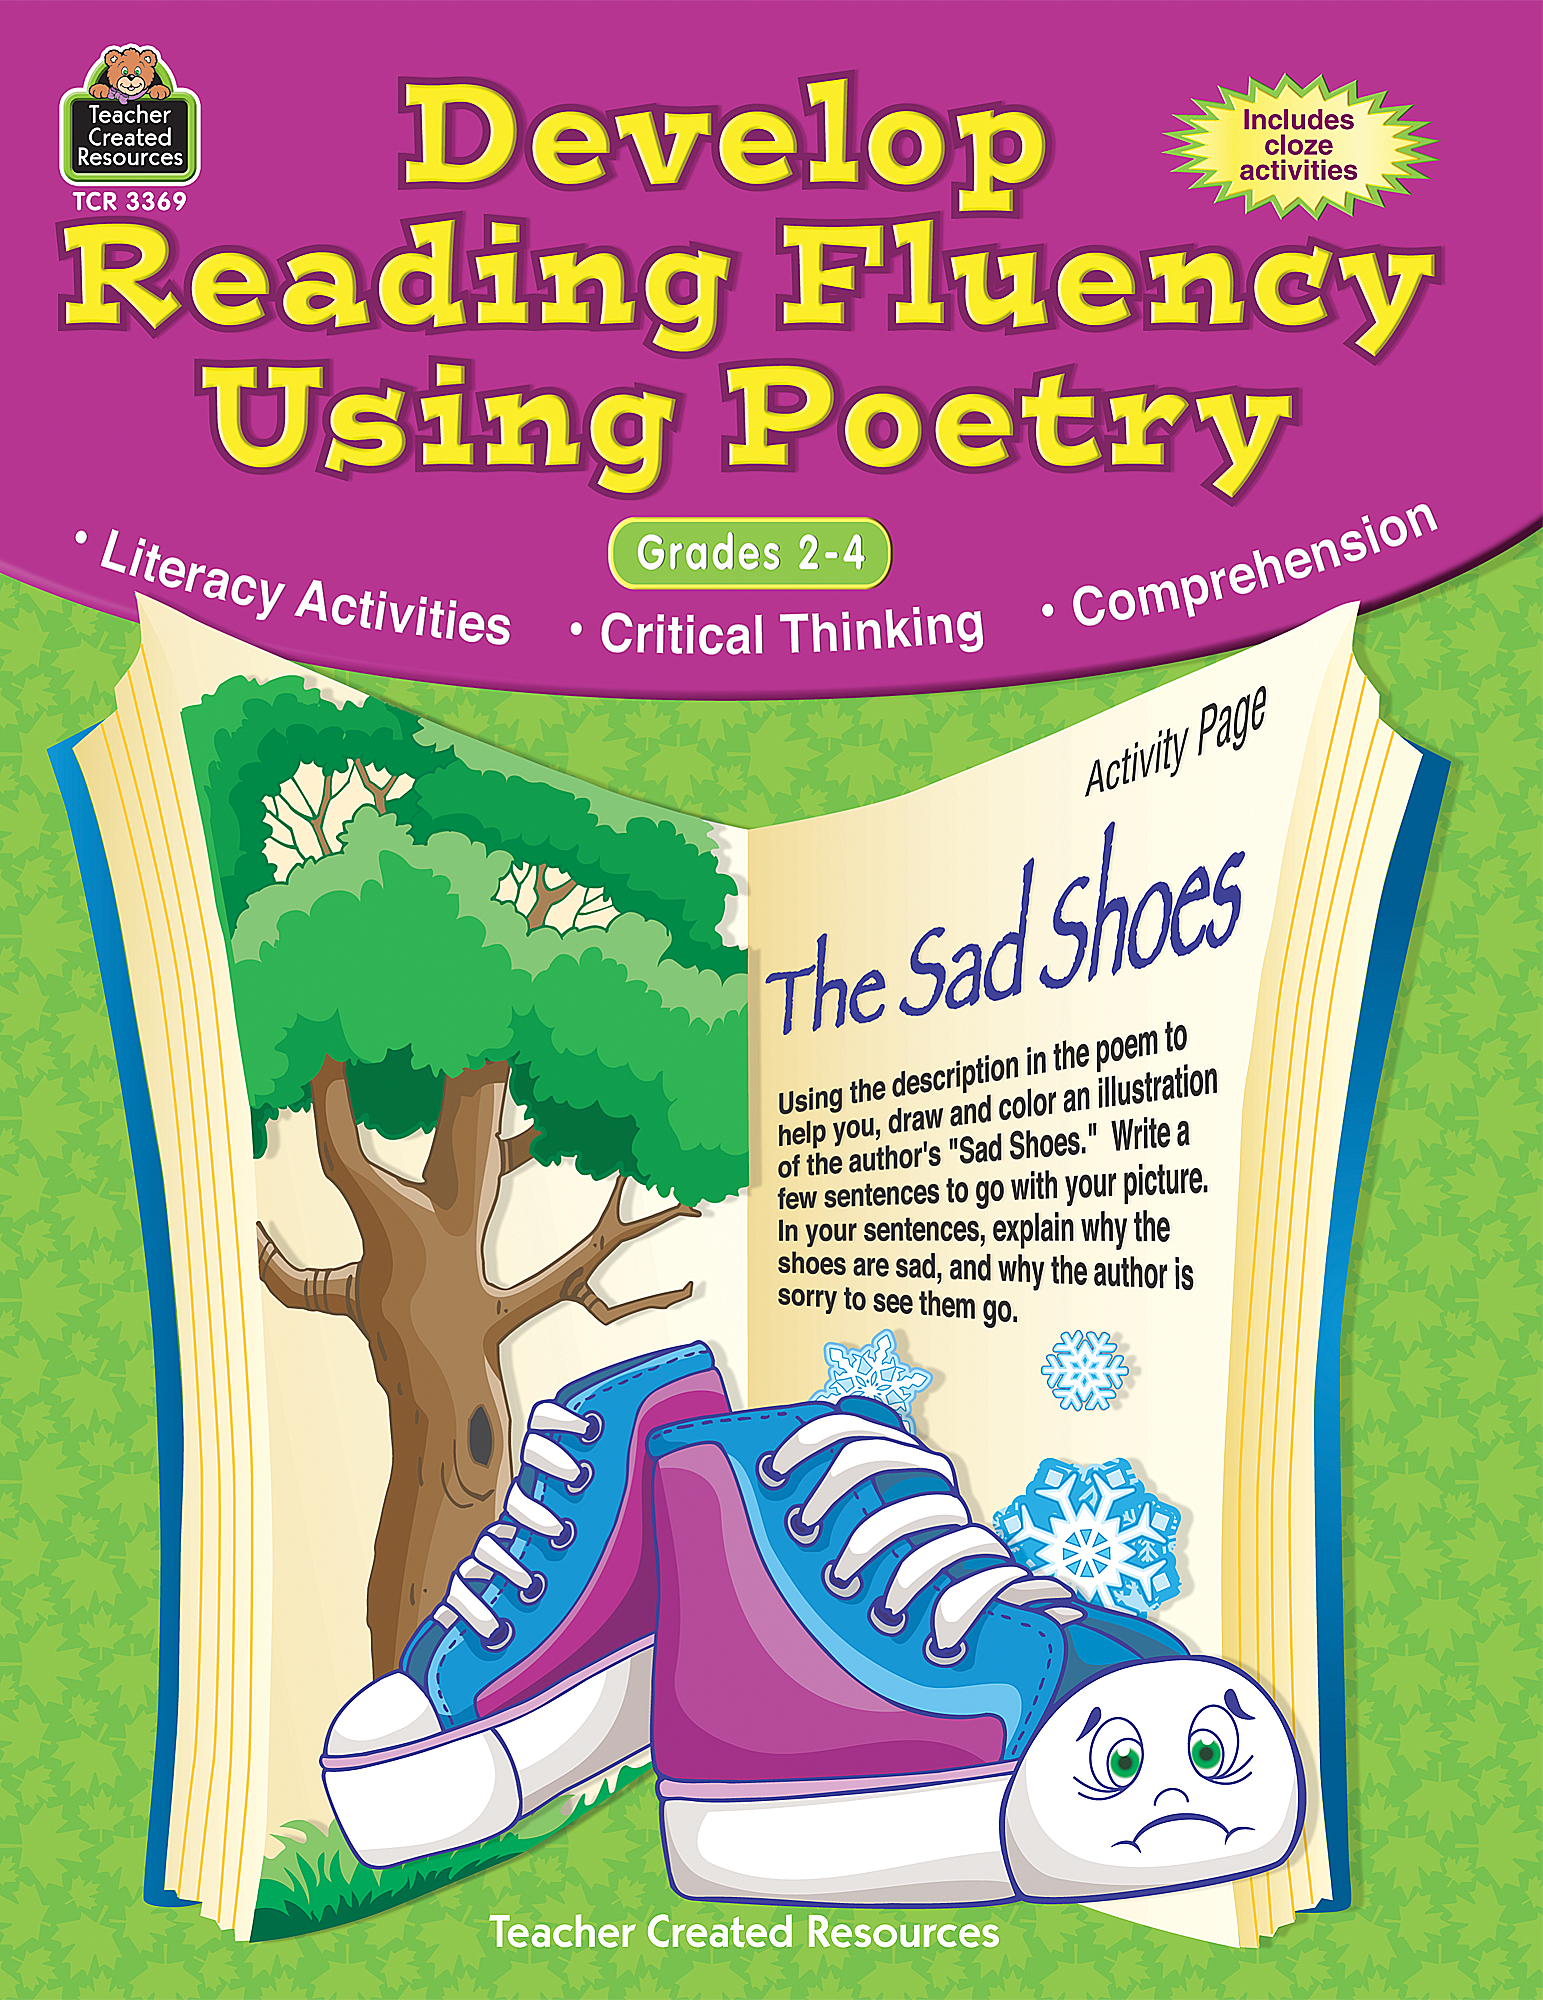 Develop Reading Fluency Using Poetry - TCR3369 | Teacher Created Resources